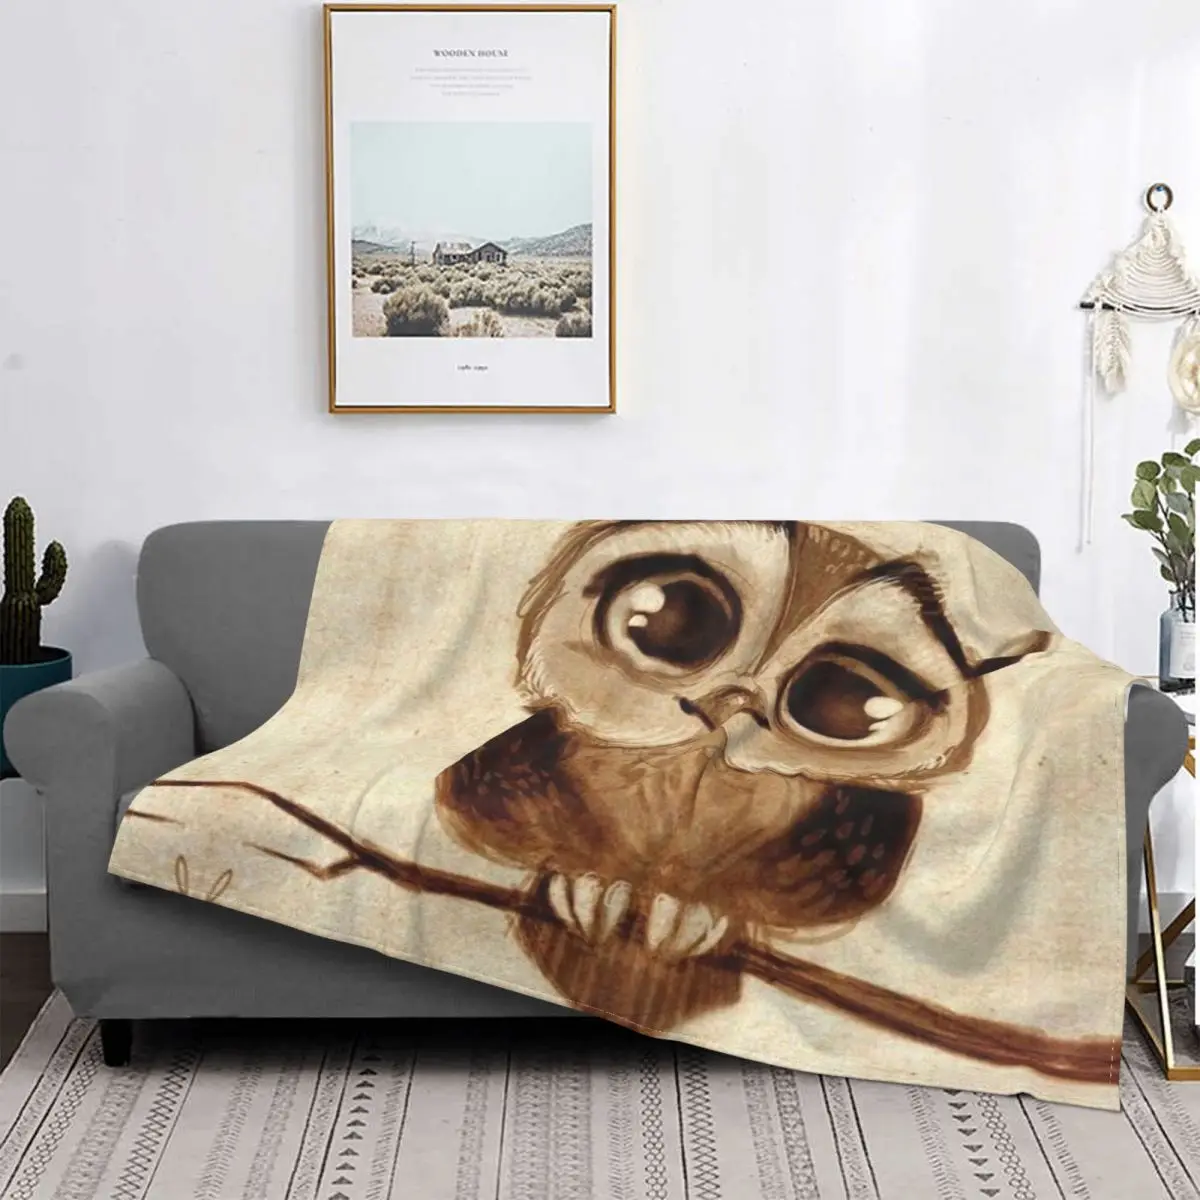 

Owl Portable Ambiance Non-Fading Non-Stick Travel Space Skin-Friendly Home Decor Blanket Lightweight Cute Cartoon Animation